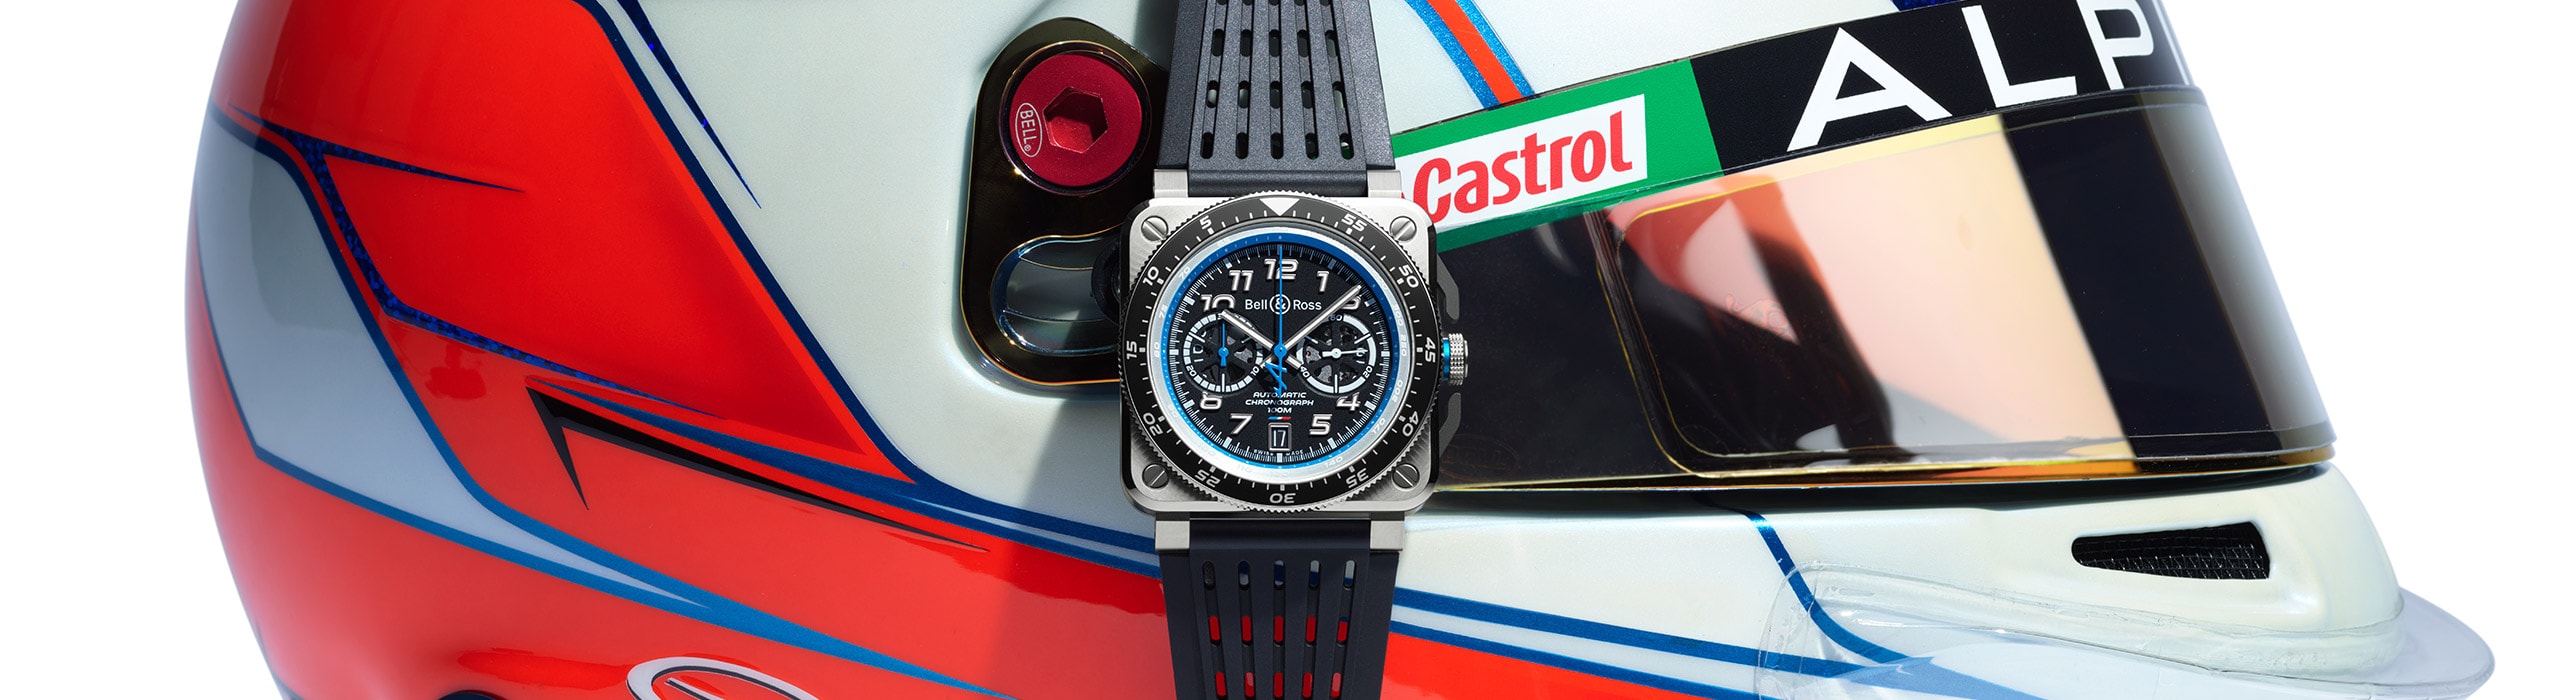 Bell and Ross Celebrates Alpines Debut at 2021 French Grand Prix With New Watch